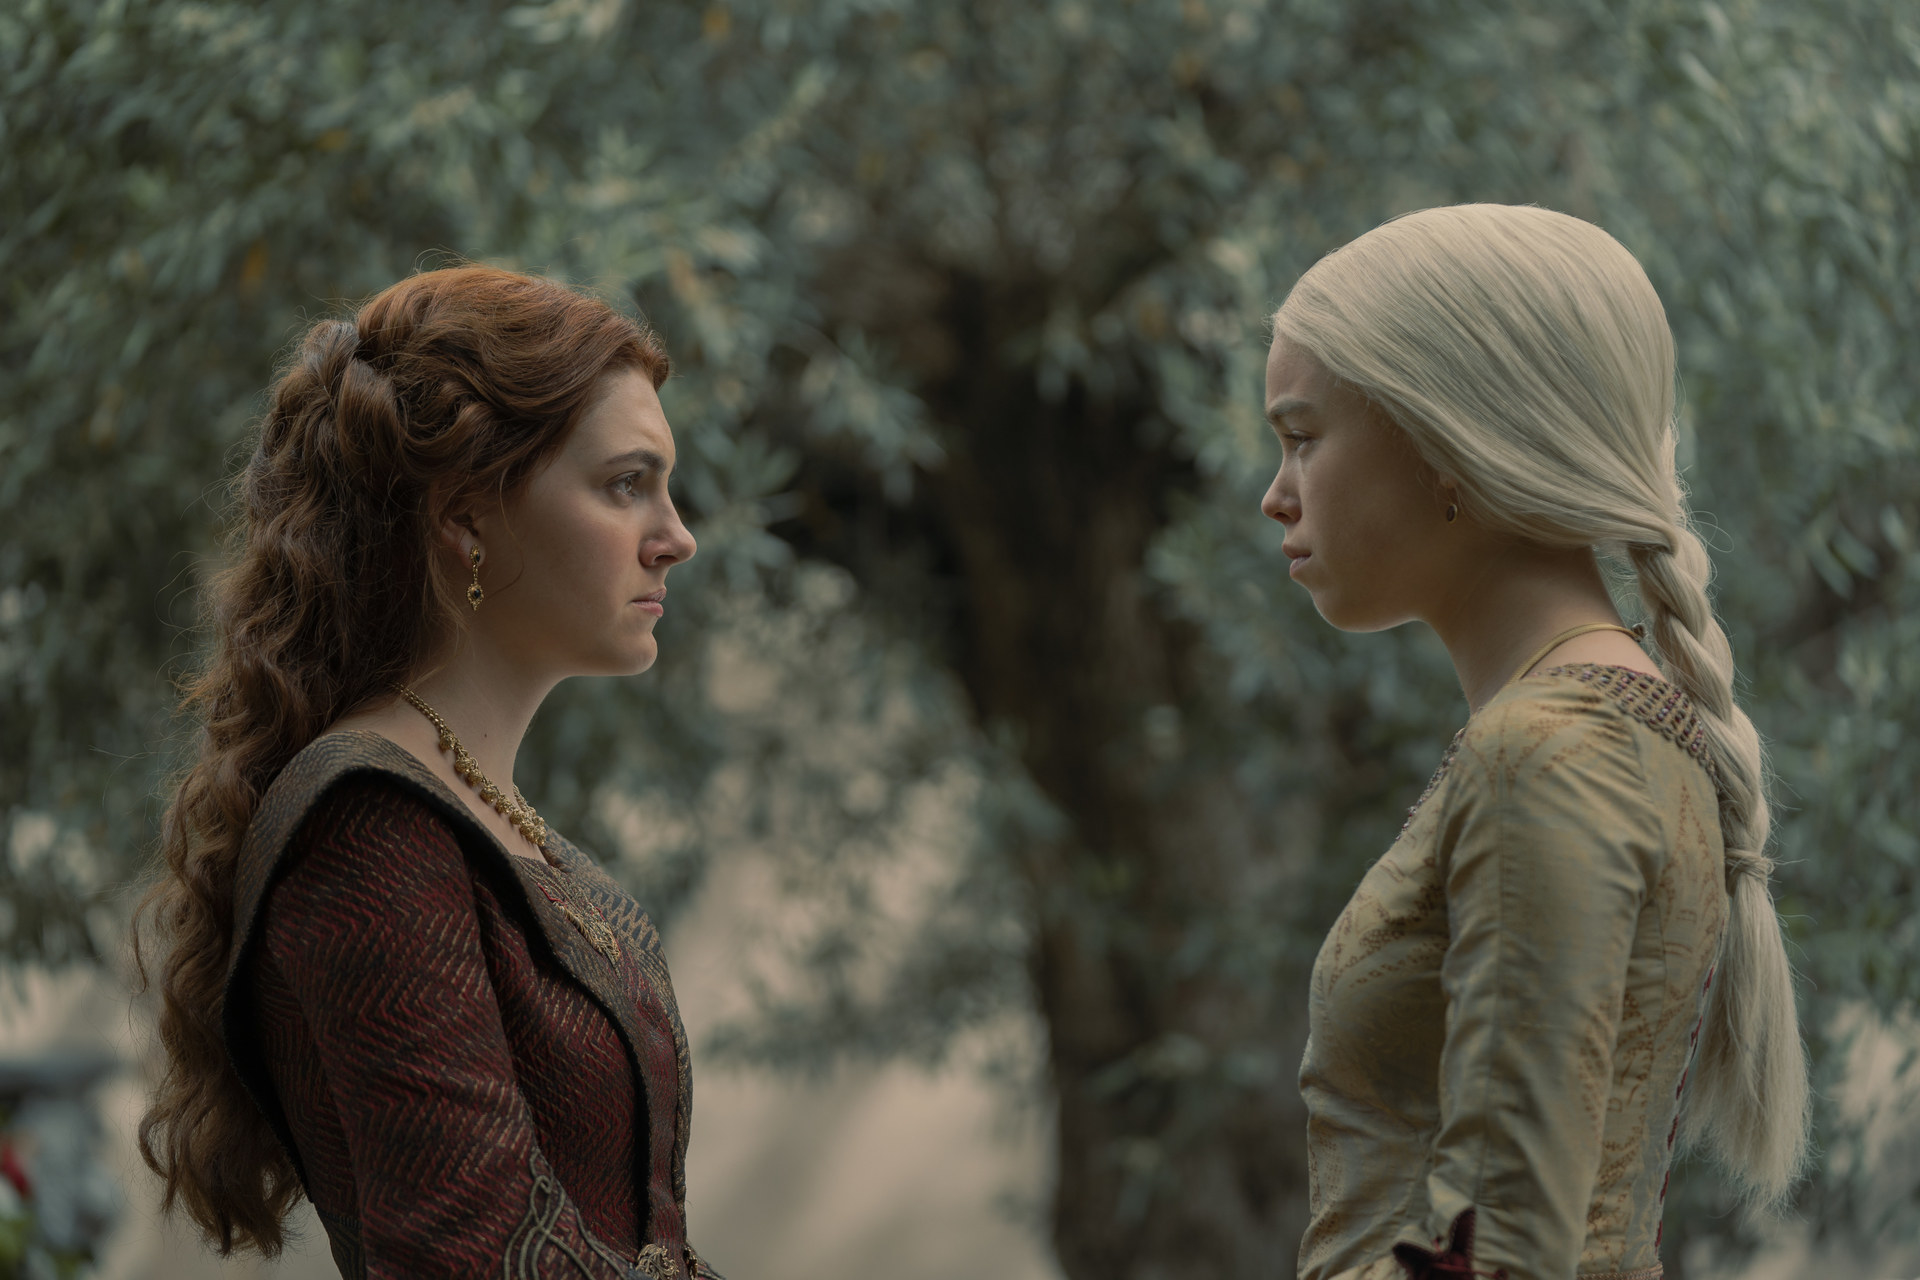 Alicent and Rhaenyra face each other looking distressed